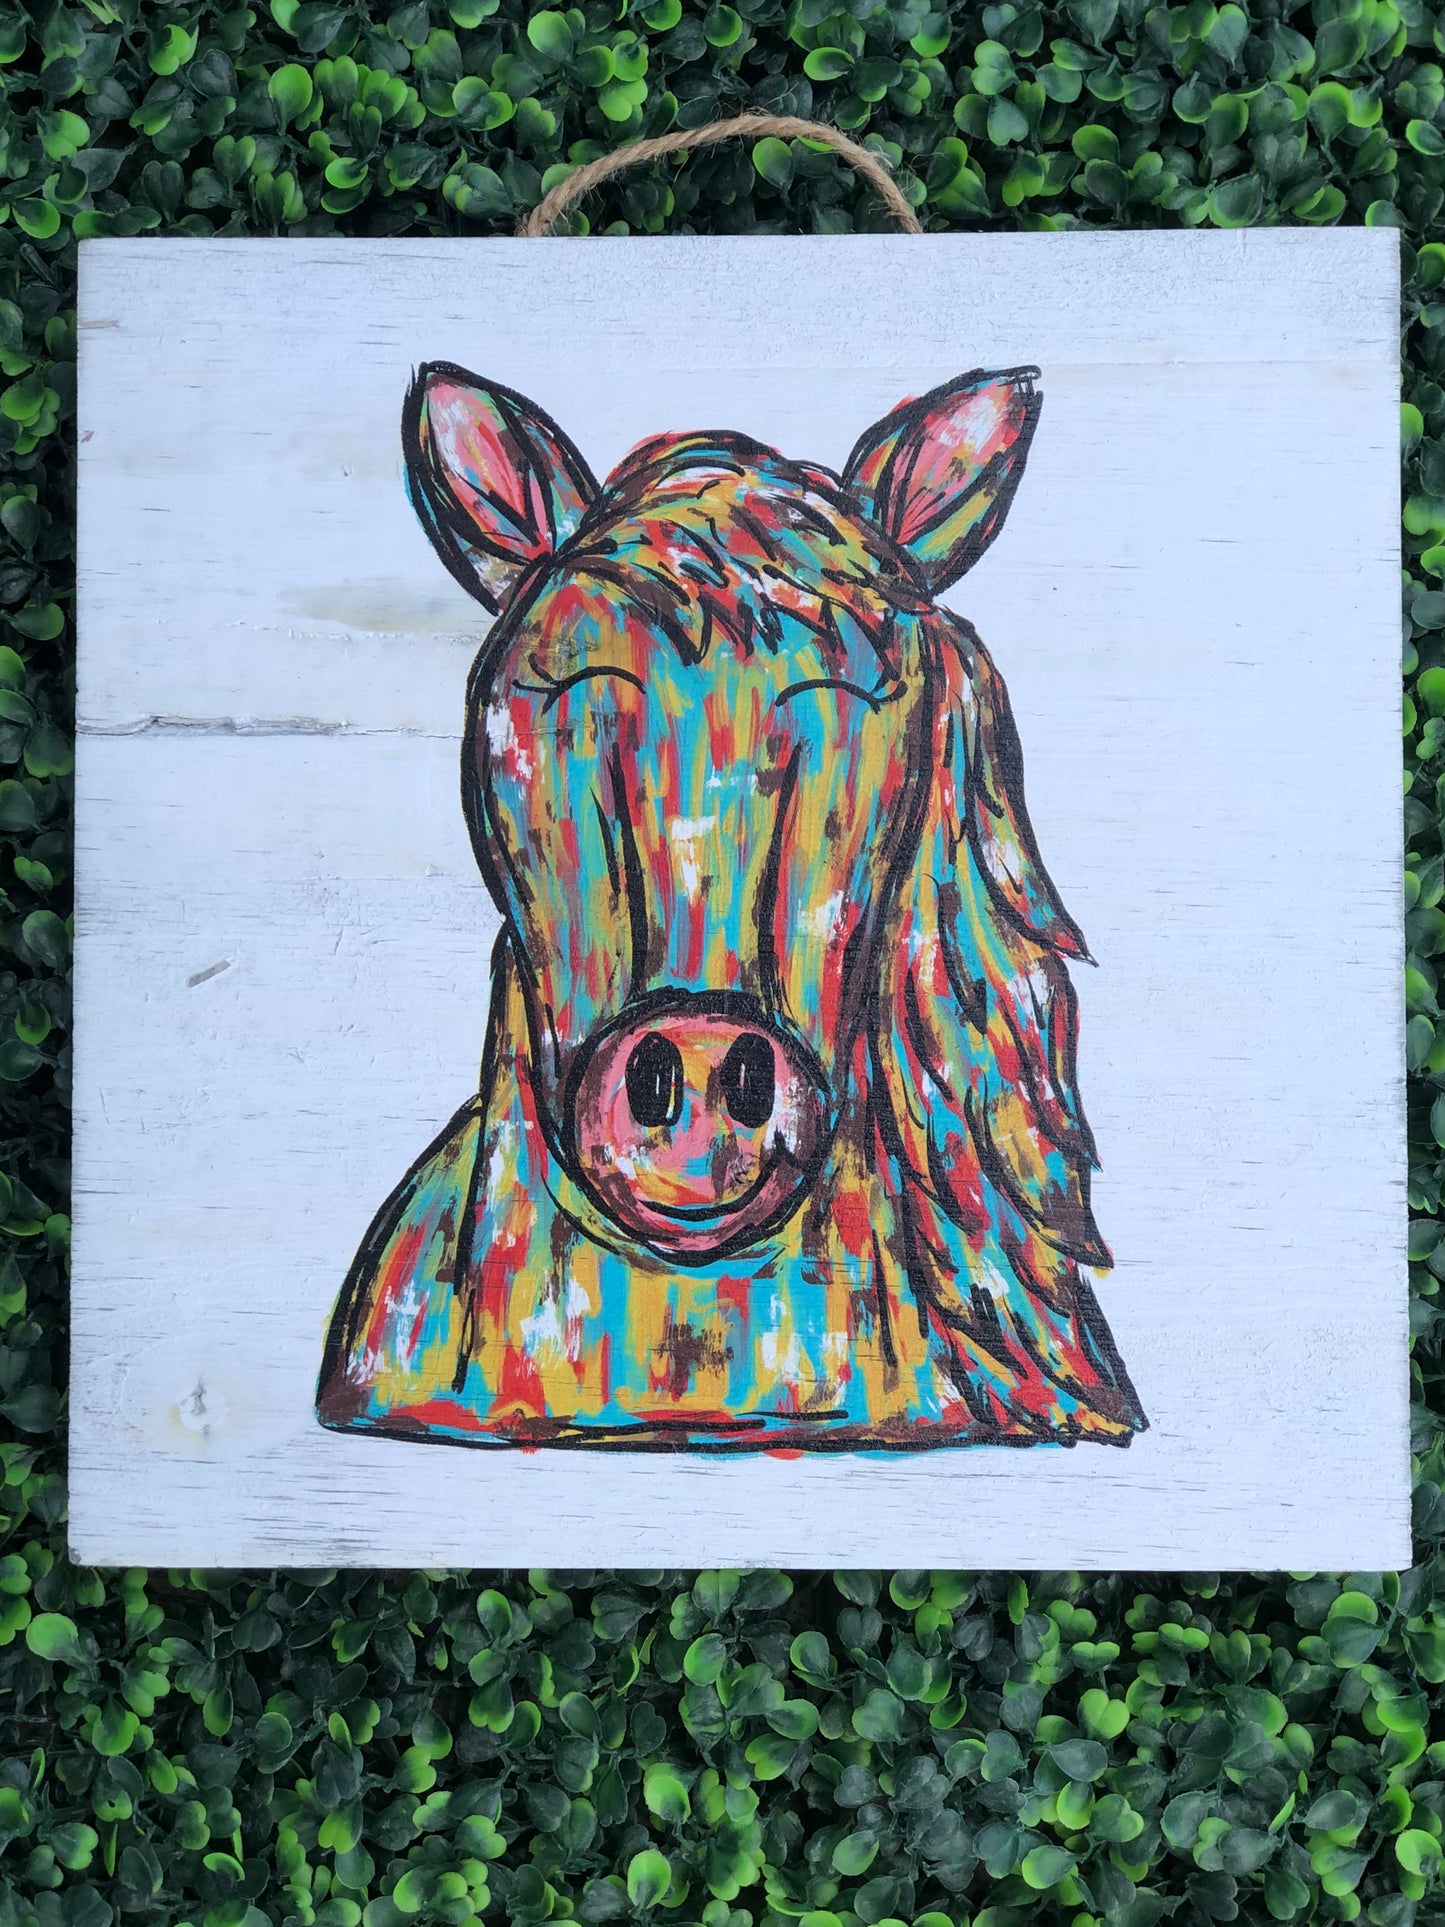 10" x 10" Colorful horse wooden sign